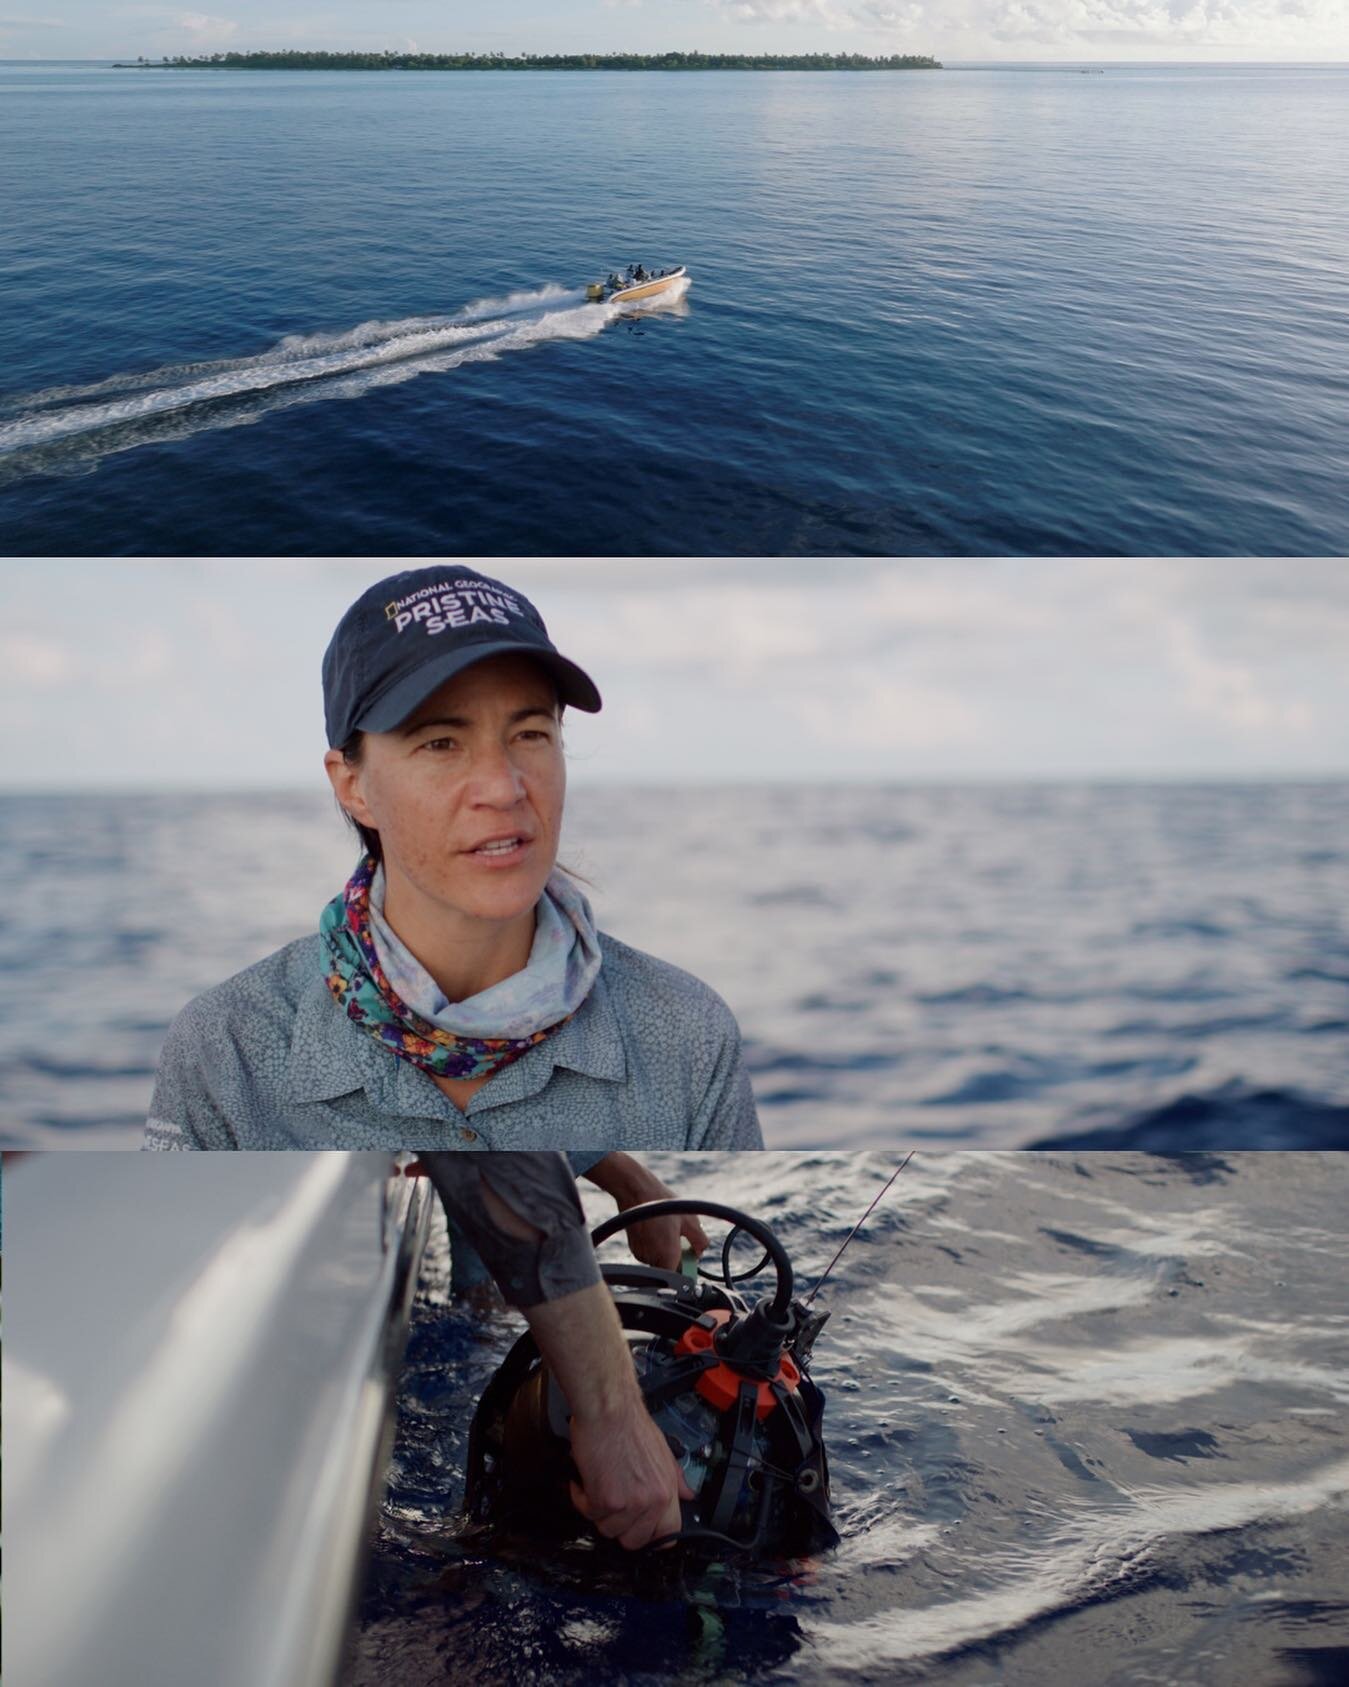 Just wrapped up 23 days of expedition storytelling with the National Geographic Pristine Seas team. It was a pleasure to work with such a knowledgeable, passionate team of scientists, camera ops and expedition leaders.

Frames from a sequence followi